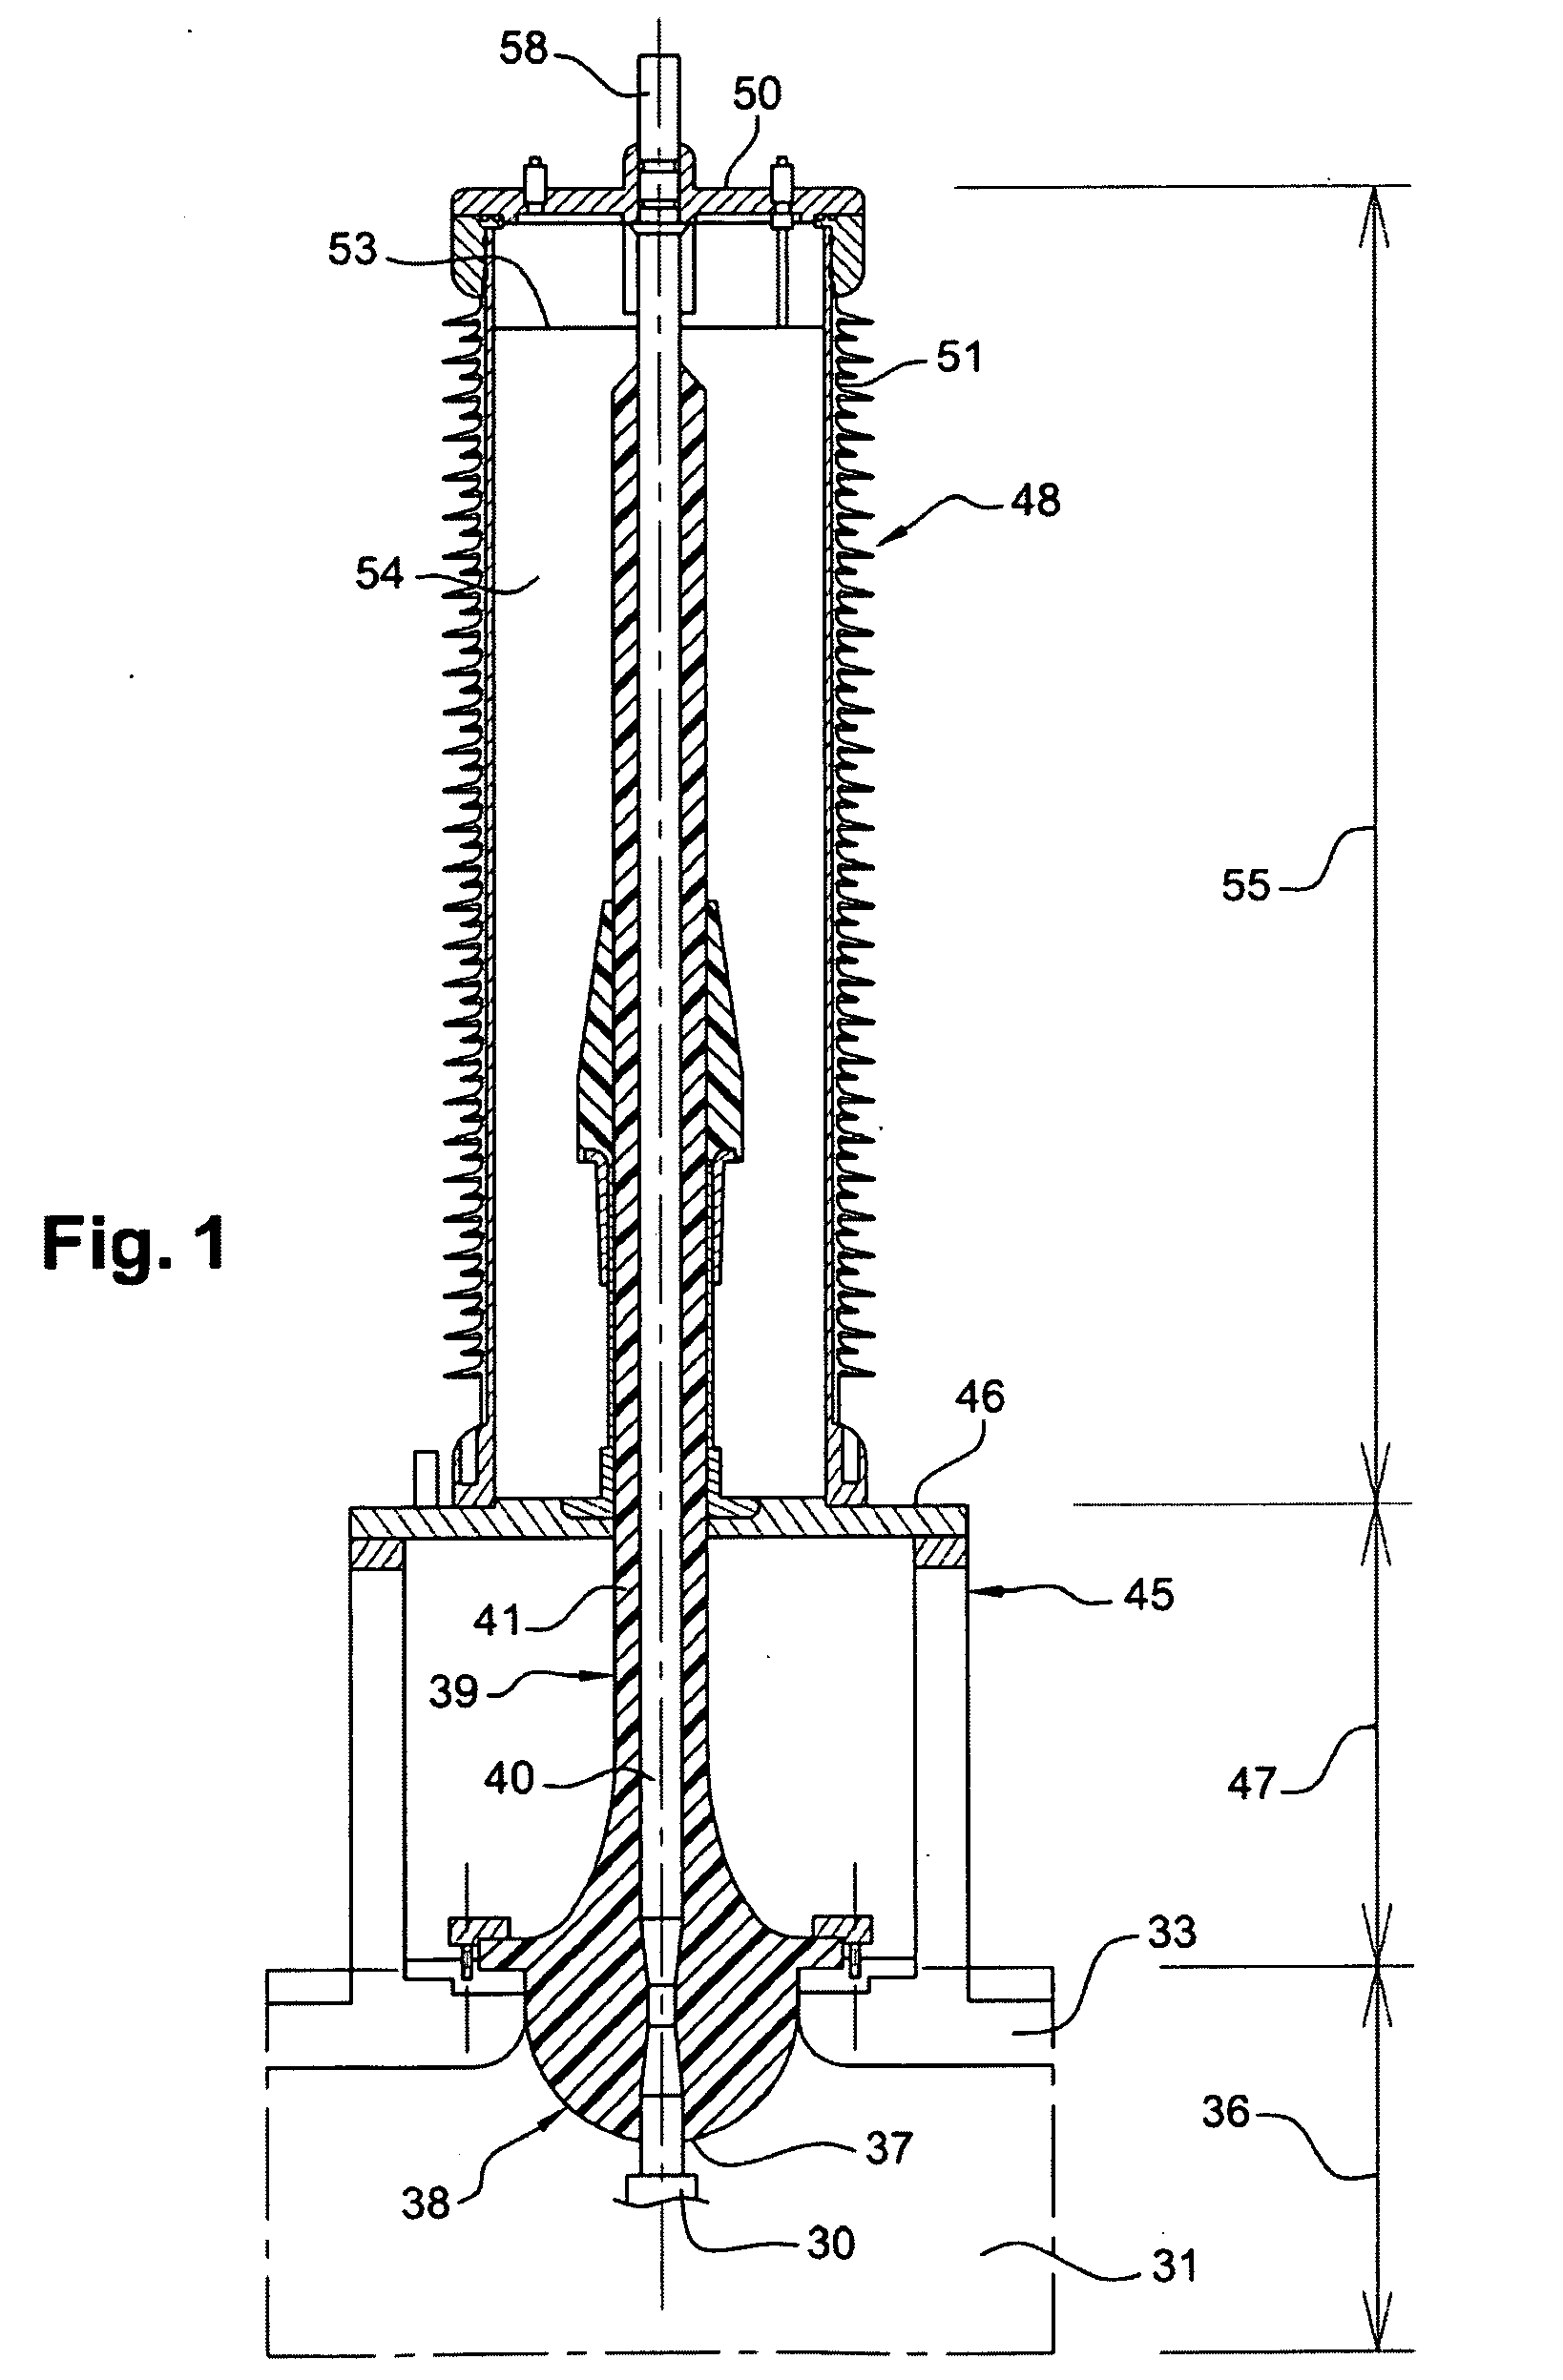 Electrical connection structure for a superconductive element